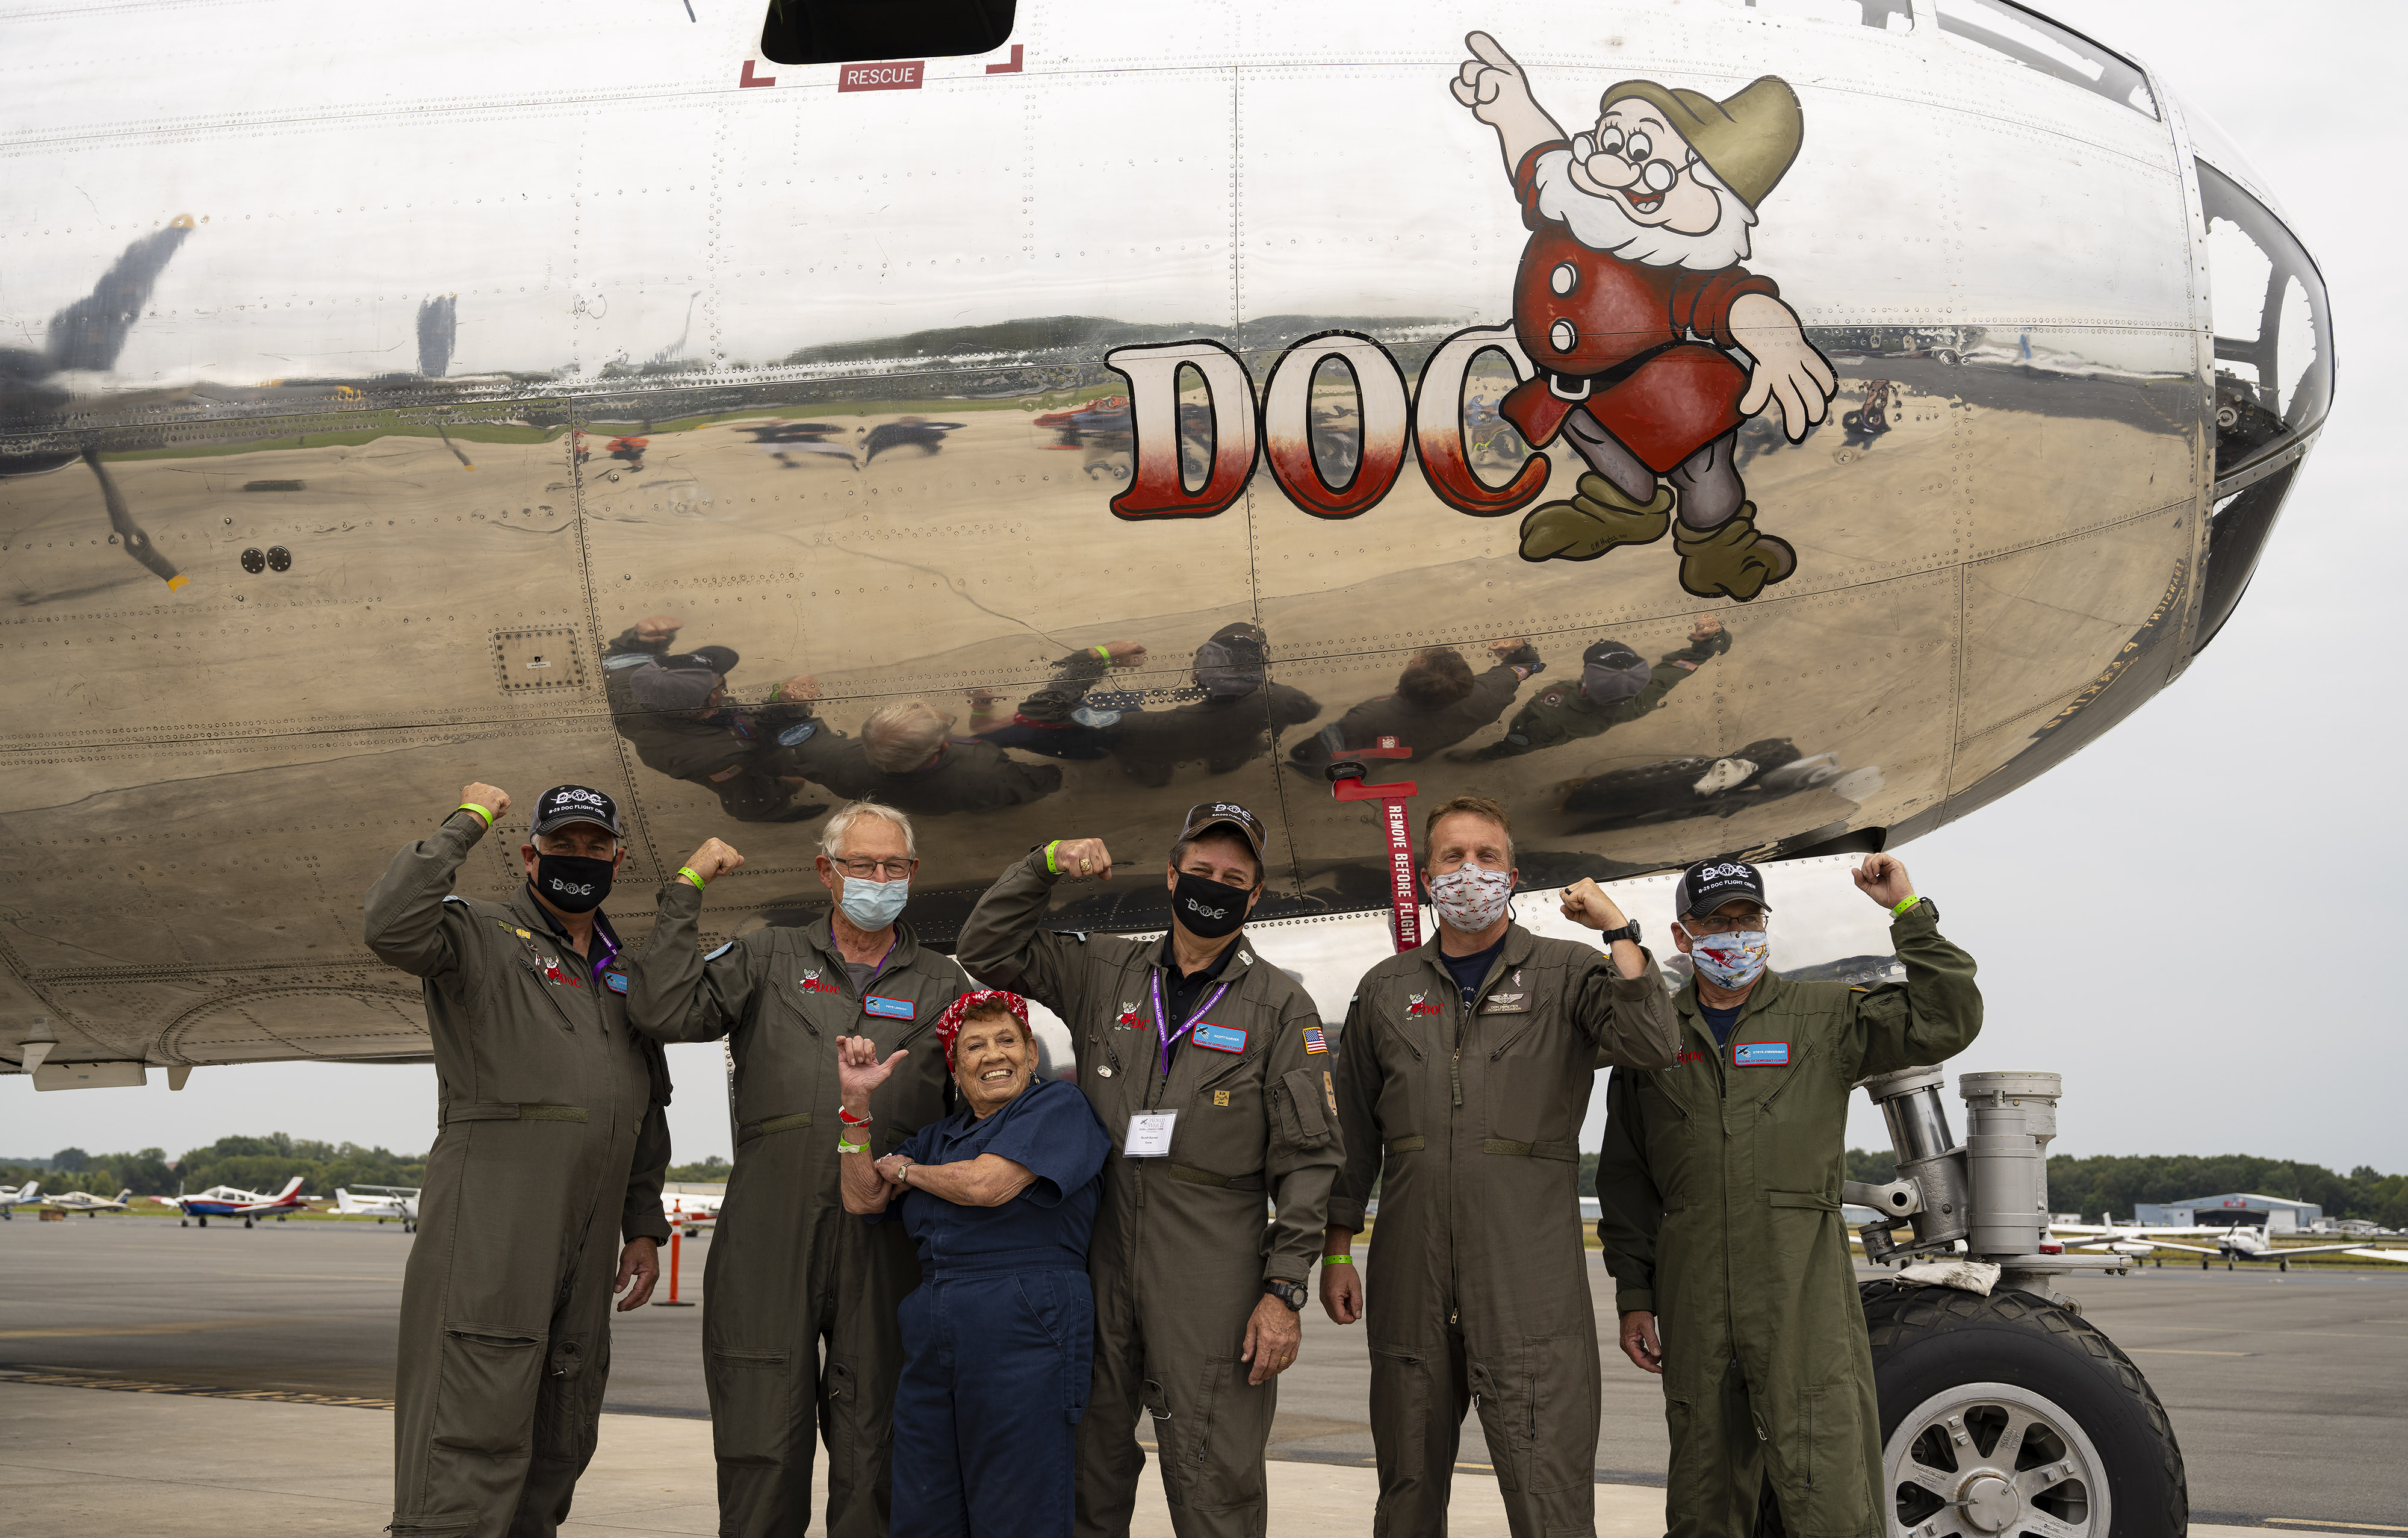 One of the original ‘Rosie the Riveters,’ Connie Palaciozas, joins crew members for the Boeing B-29 Superfortress ‘Doc,’ which she helped construct during World War II. AOPA Photo by David Tulis.